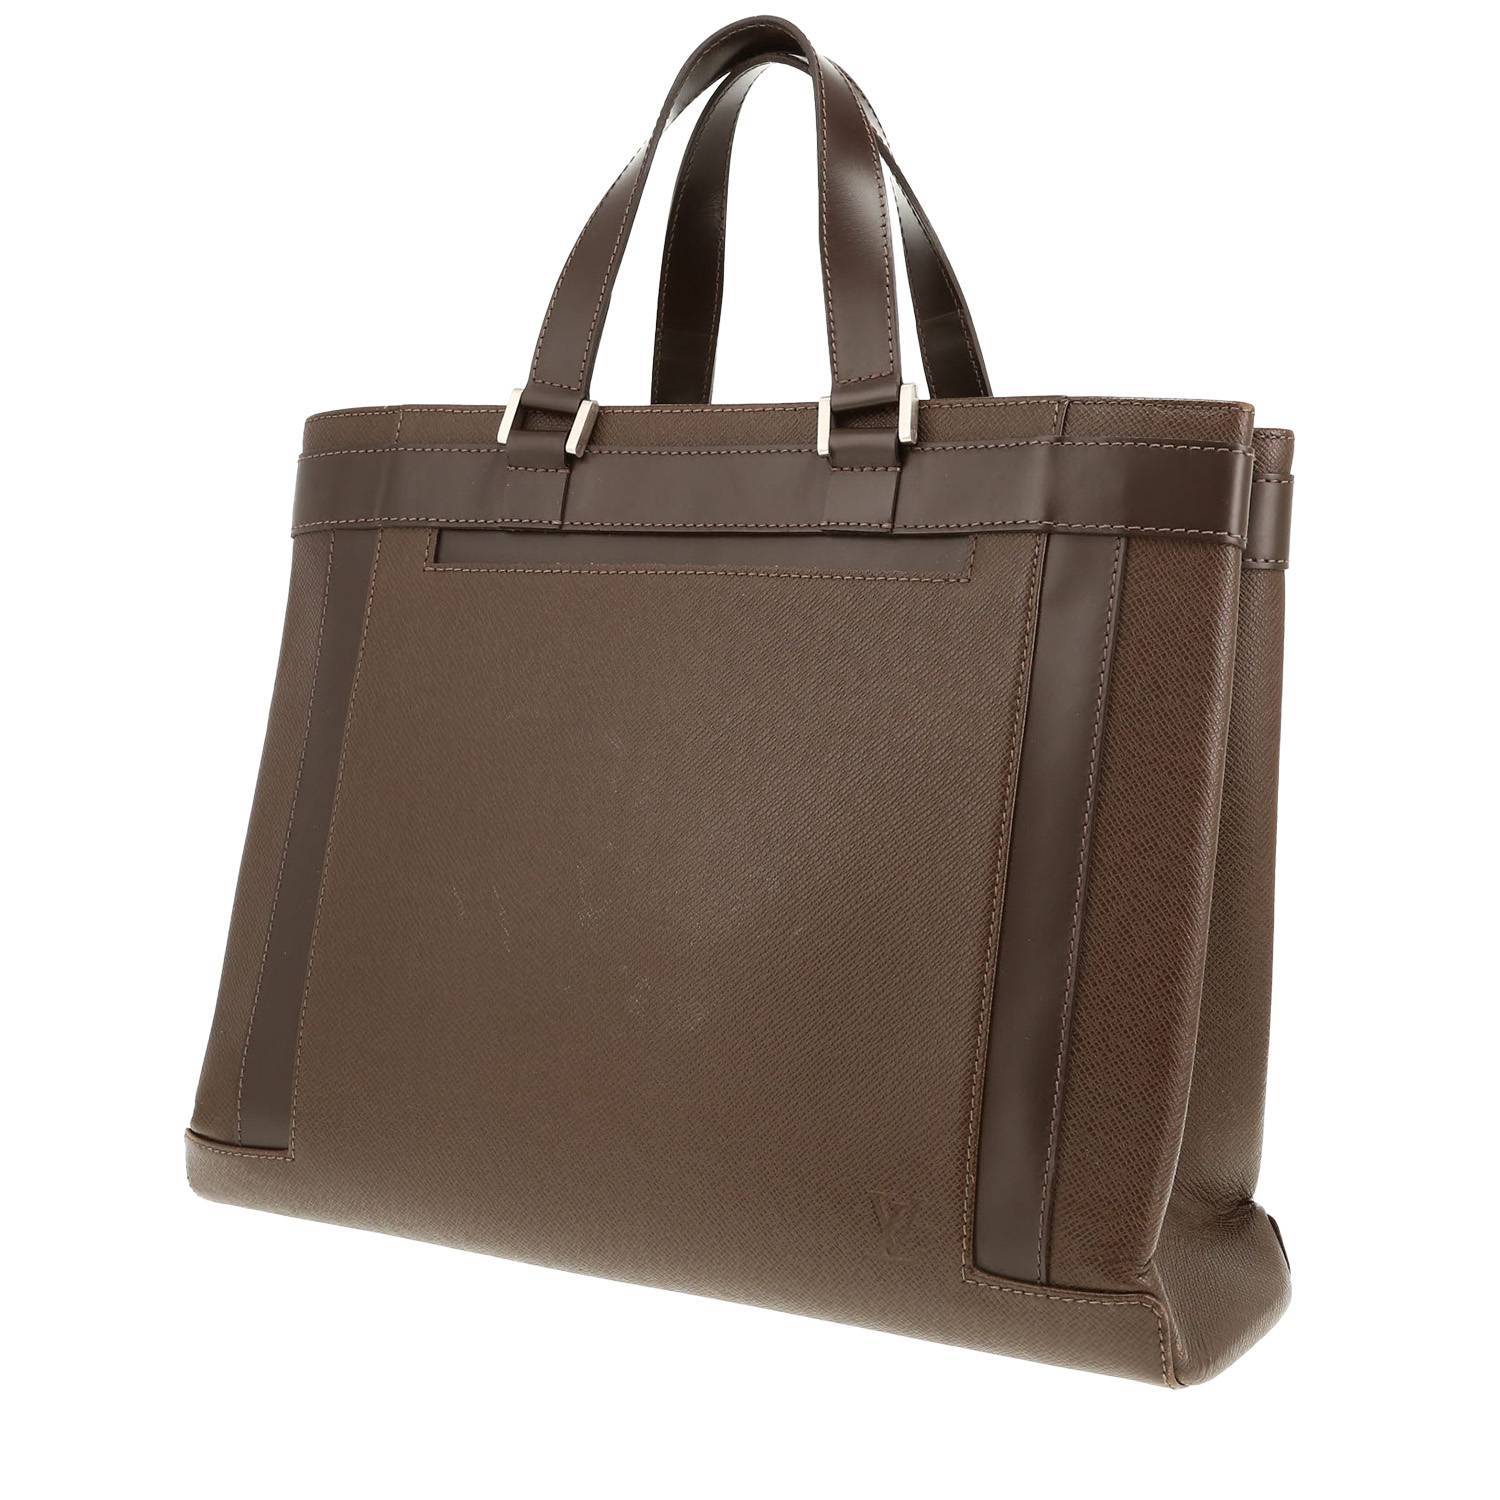 Handbag In Brown Canvas And Leather